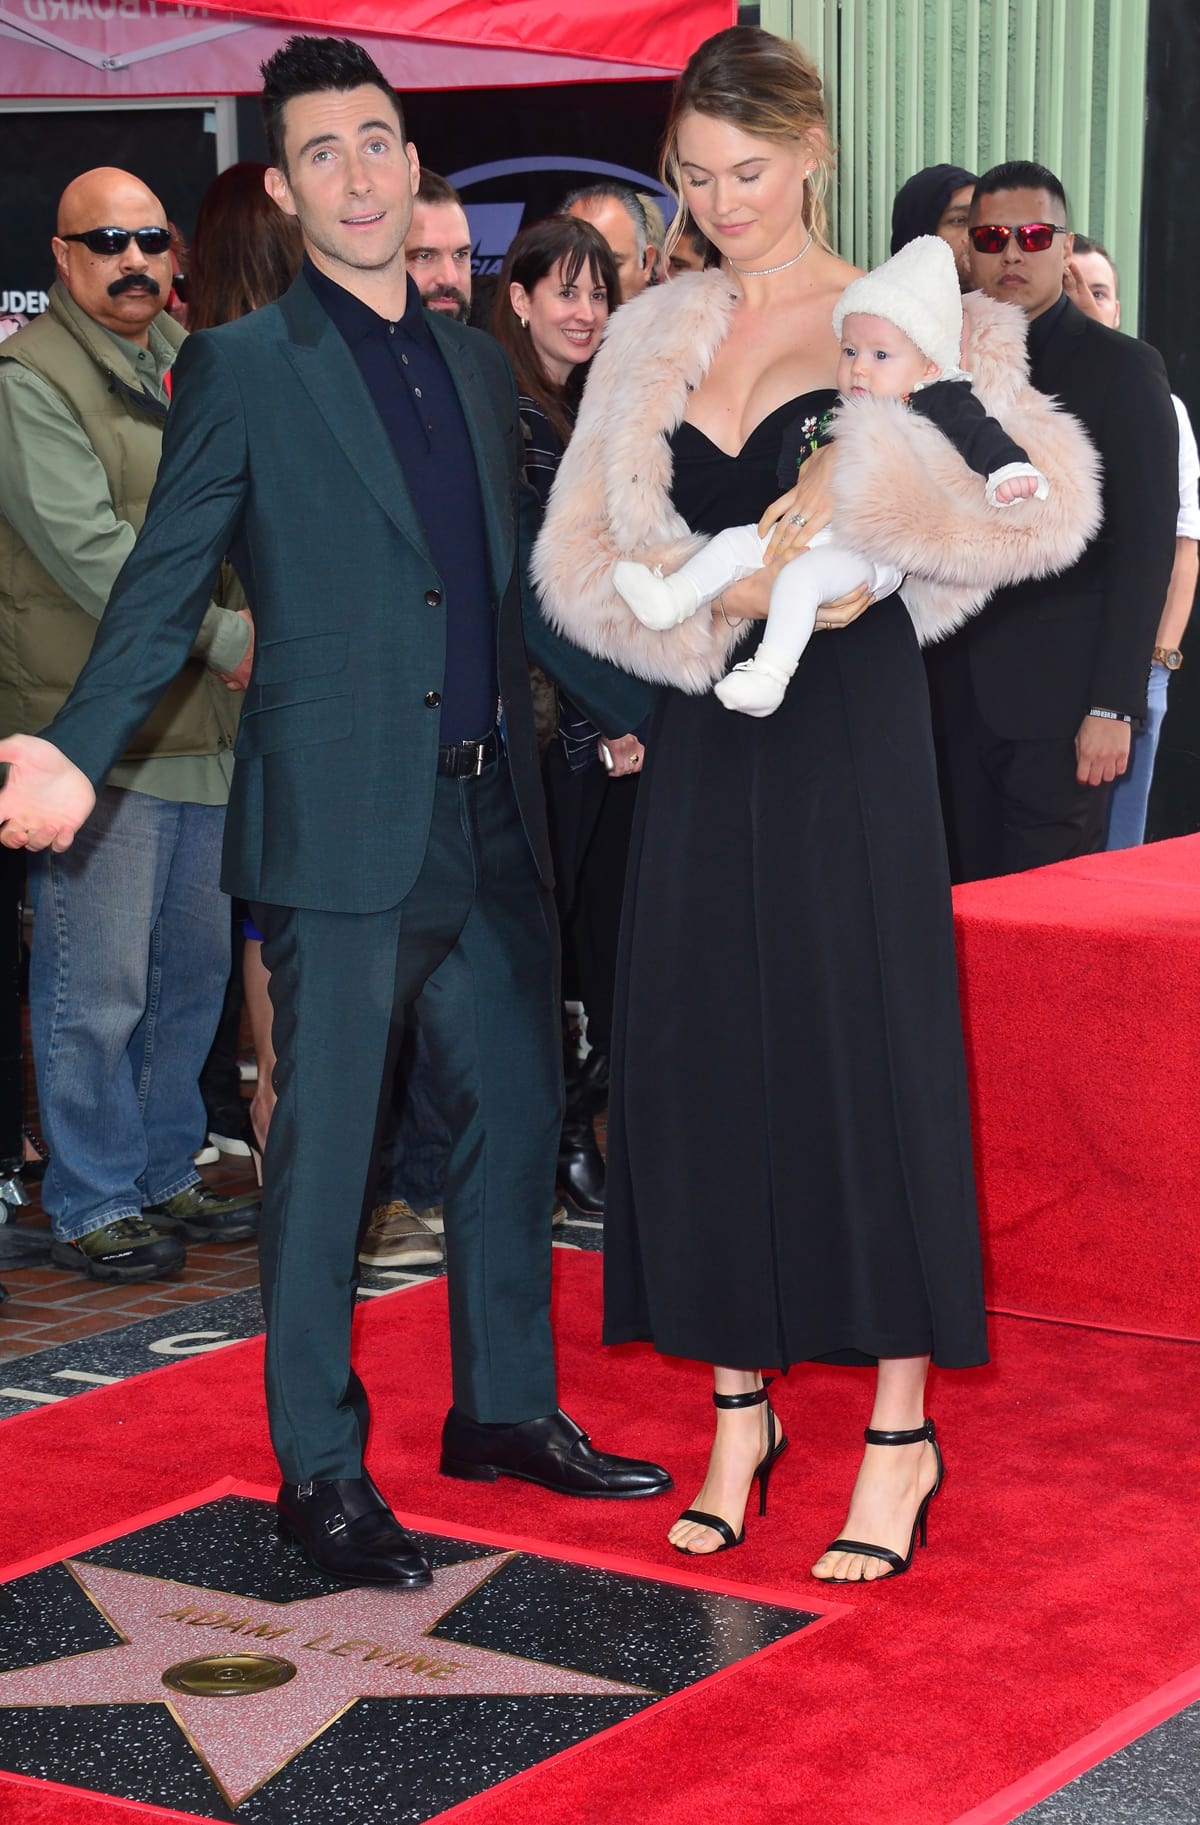 Adam Levine with his wife Behati Prinsloo and their baby girl Dusty Rose at the Hollywood Walk of Fame Star Ceremony honoring singer Adam Levine with the 2,061st star on the Hollywood Walk of Fame